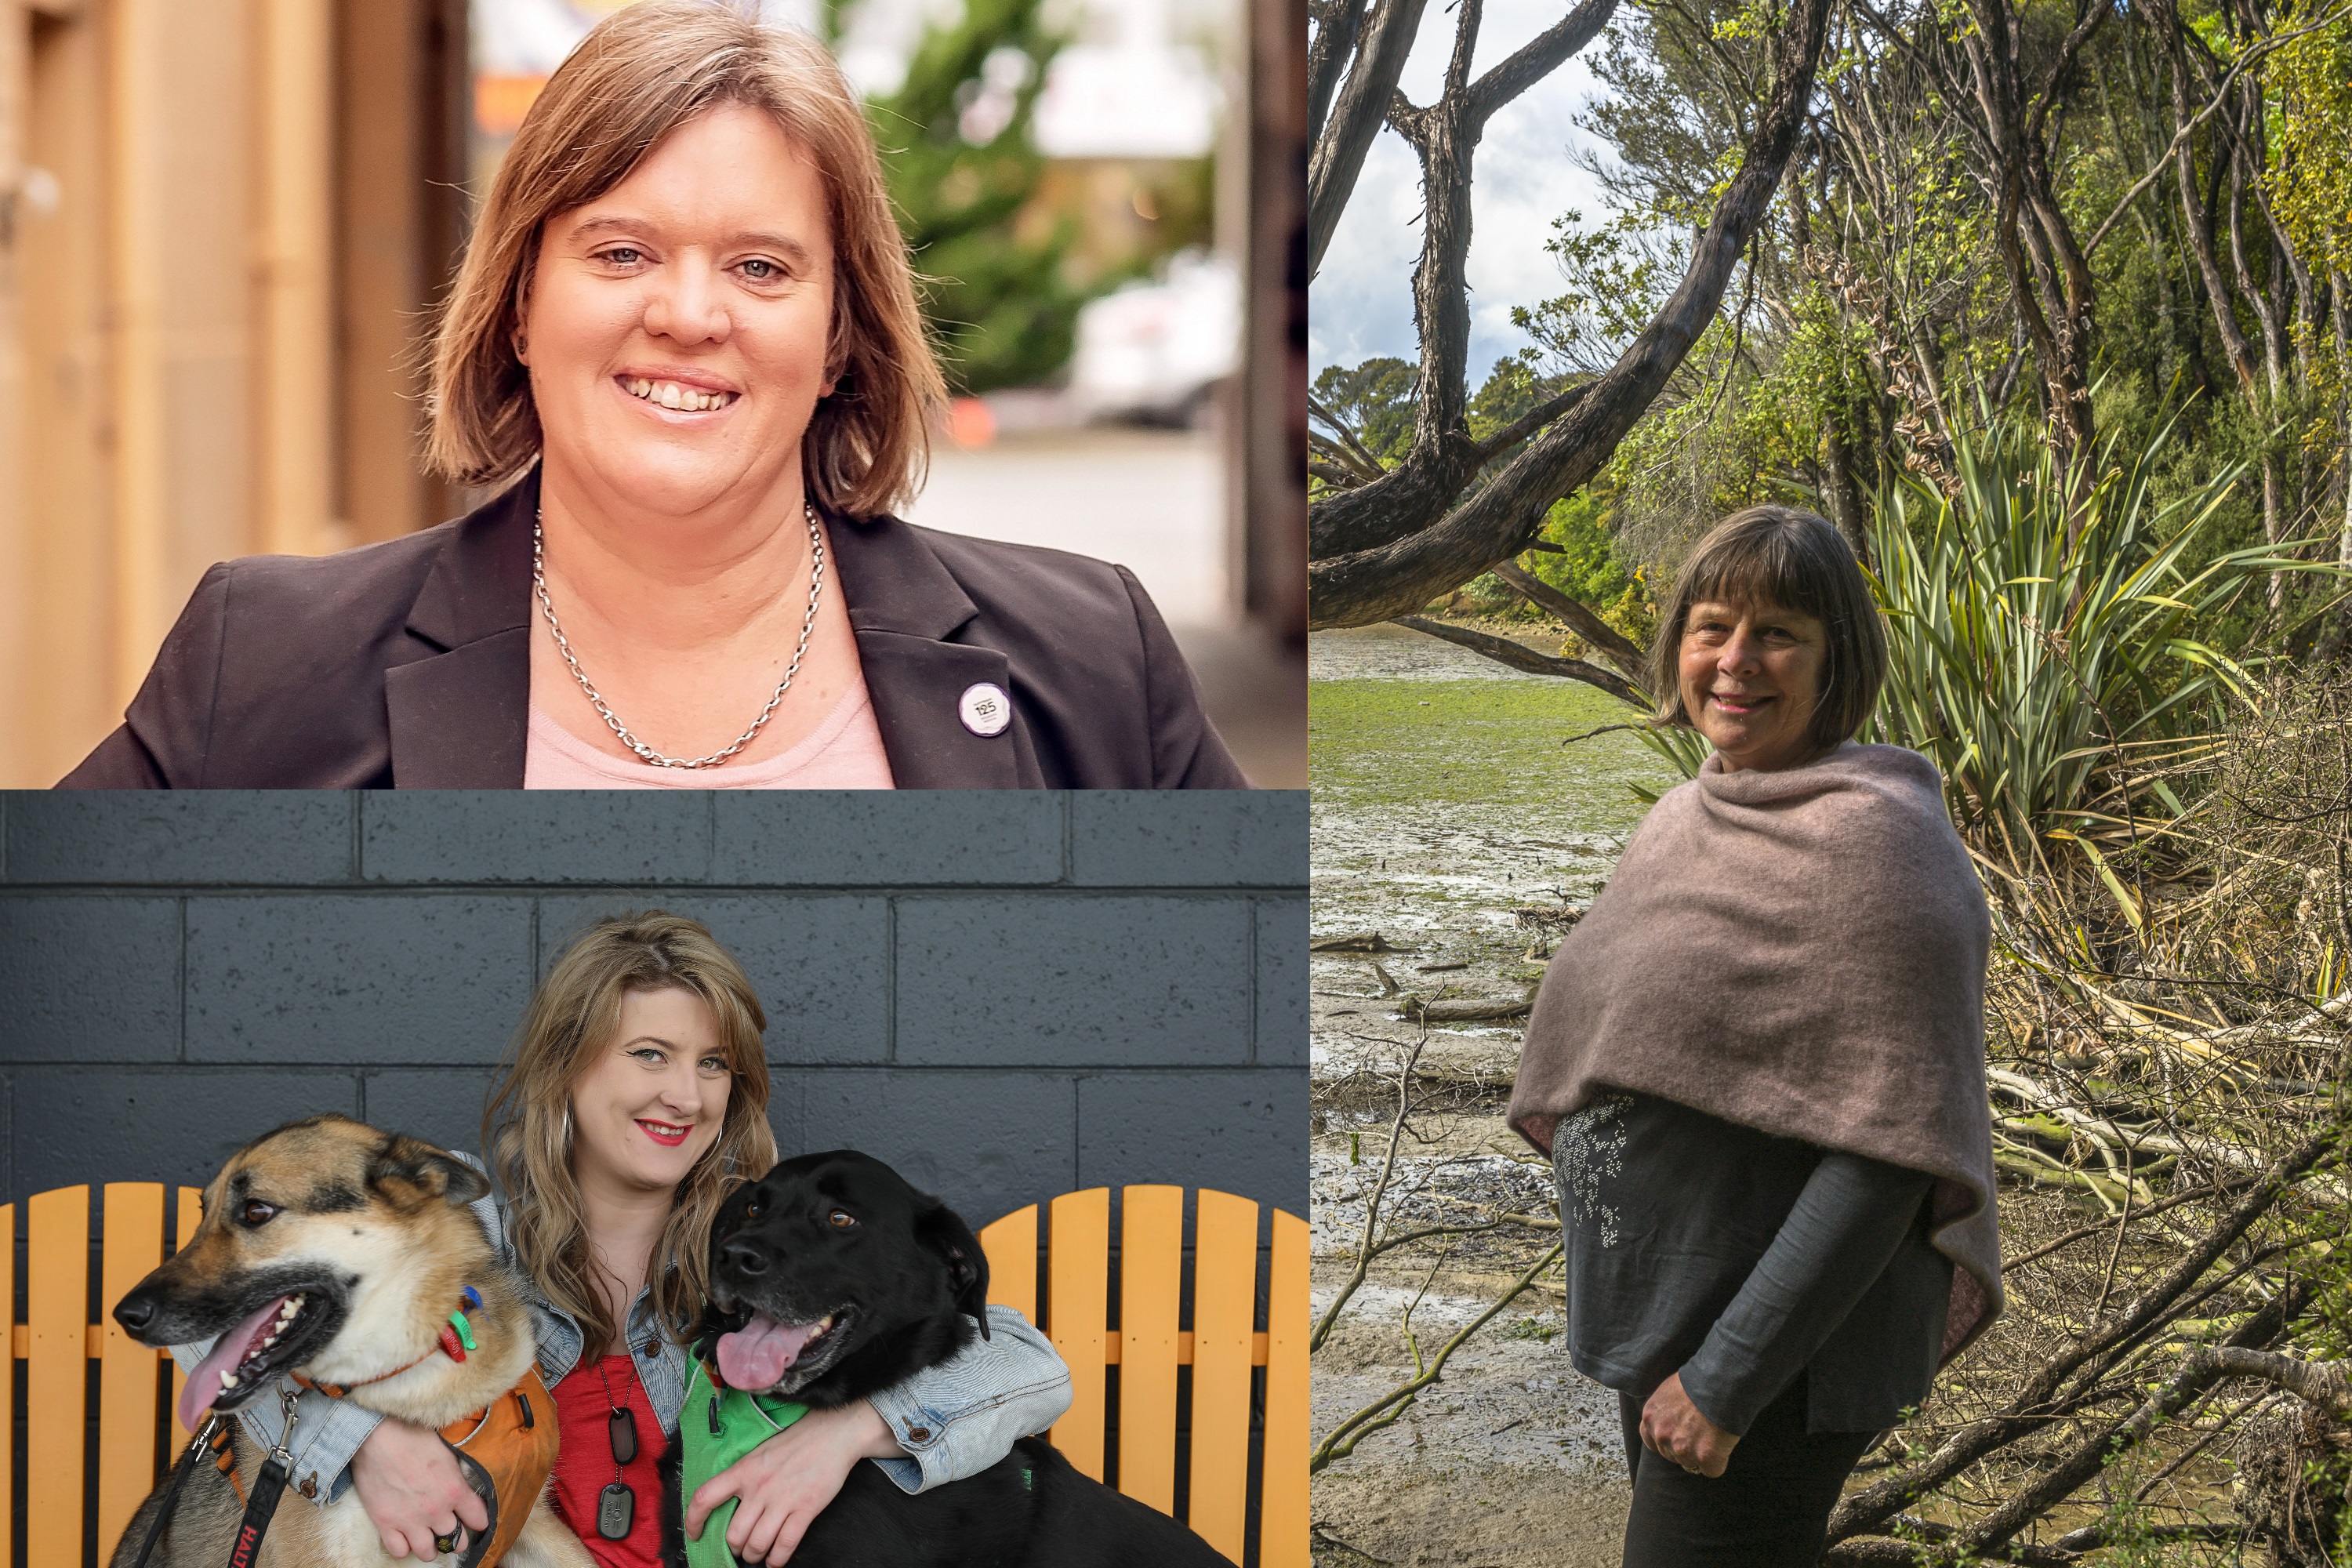 Women councillors from Southland (clockwise from top left) Rebecca Amundsen, Julie Keast and Bonnie Mager. Photos: Supplied 